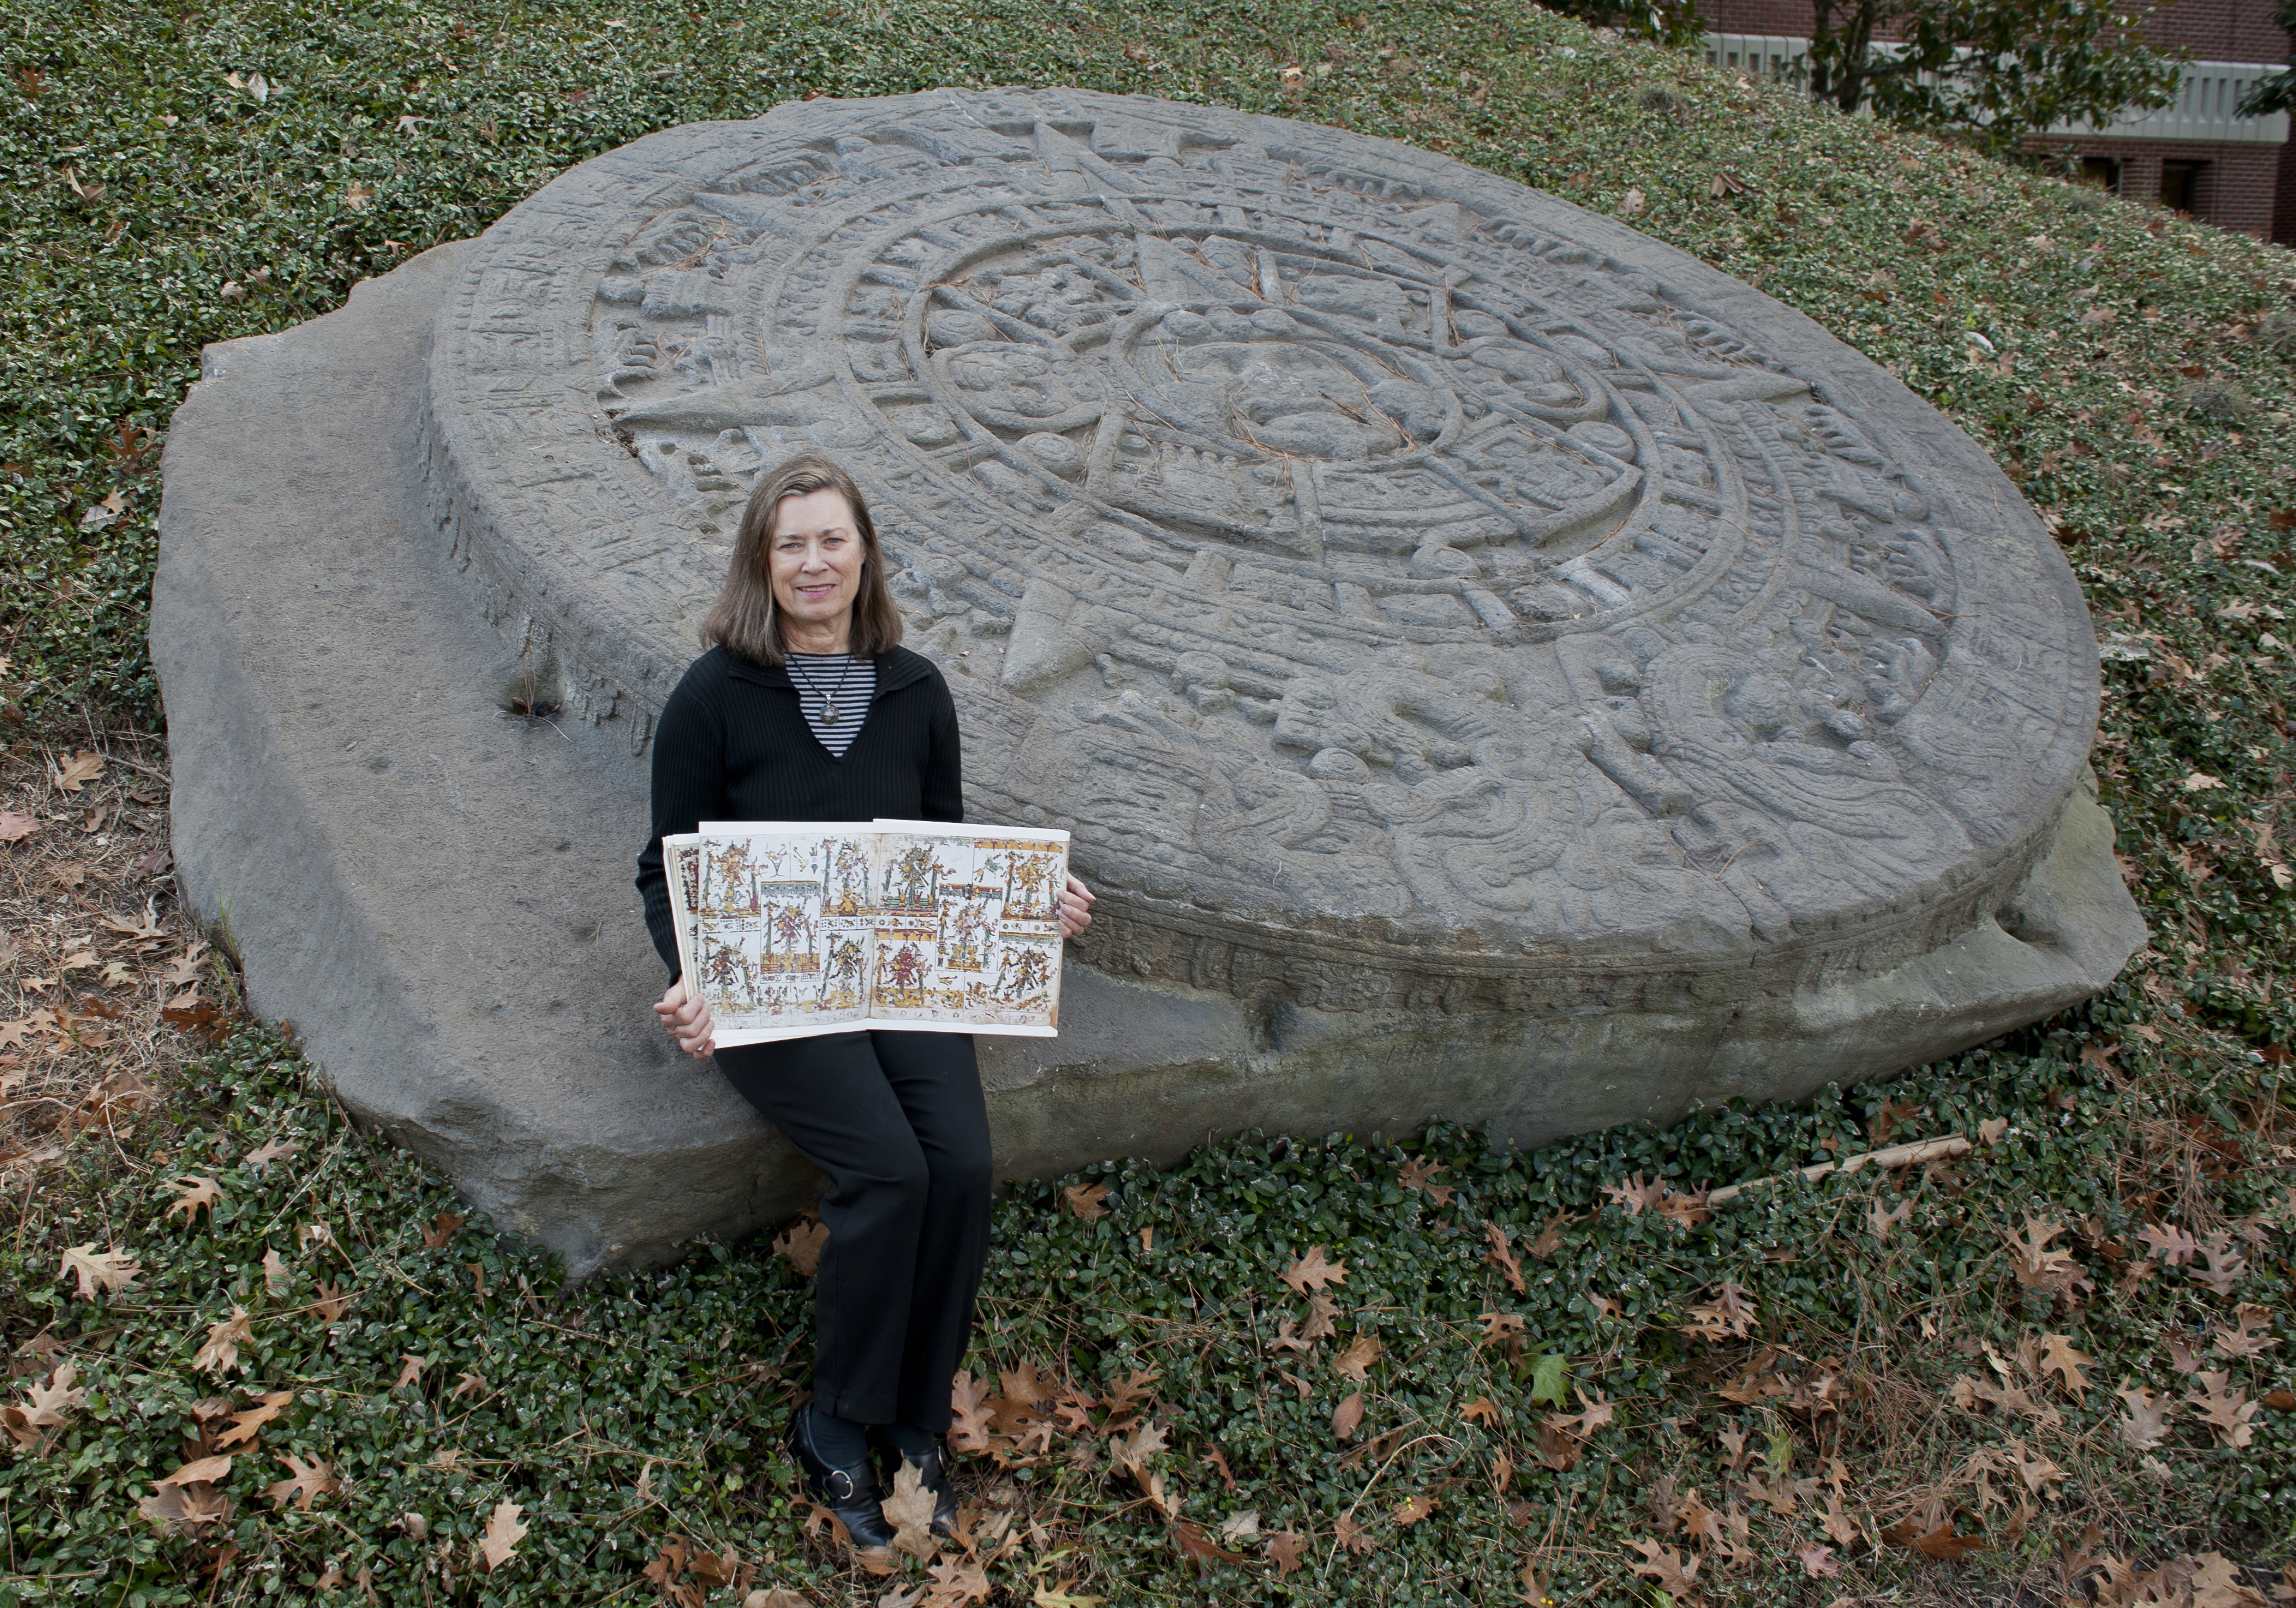 Susan Milbrath pictured with replica of the Aztec sun stone in the